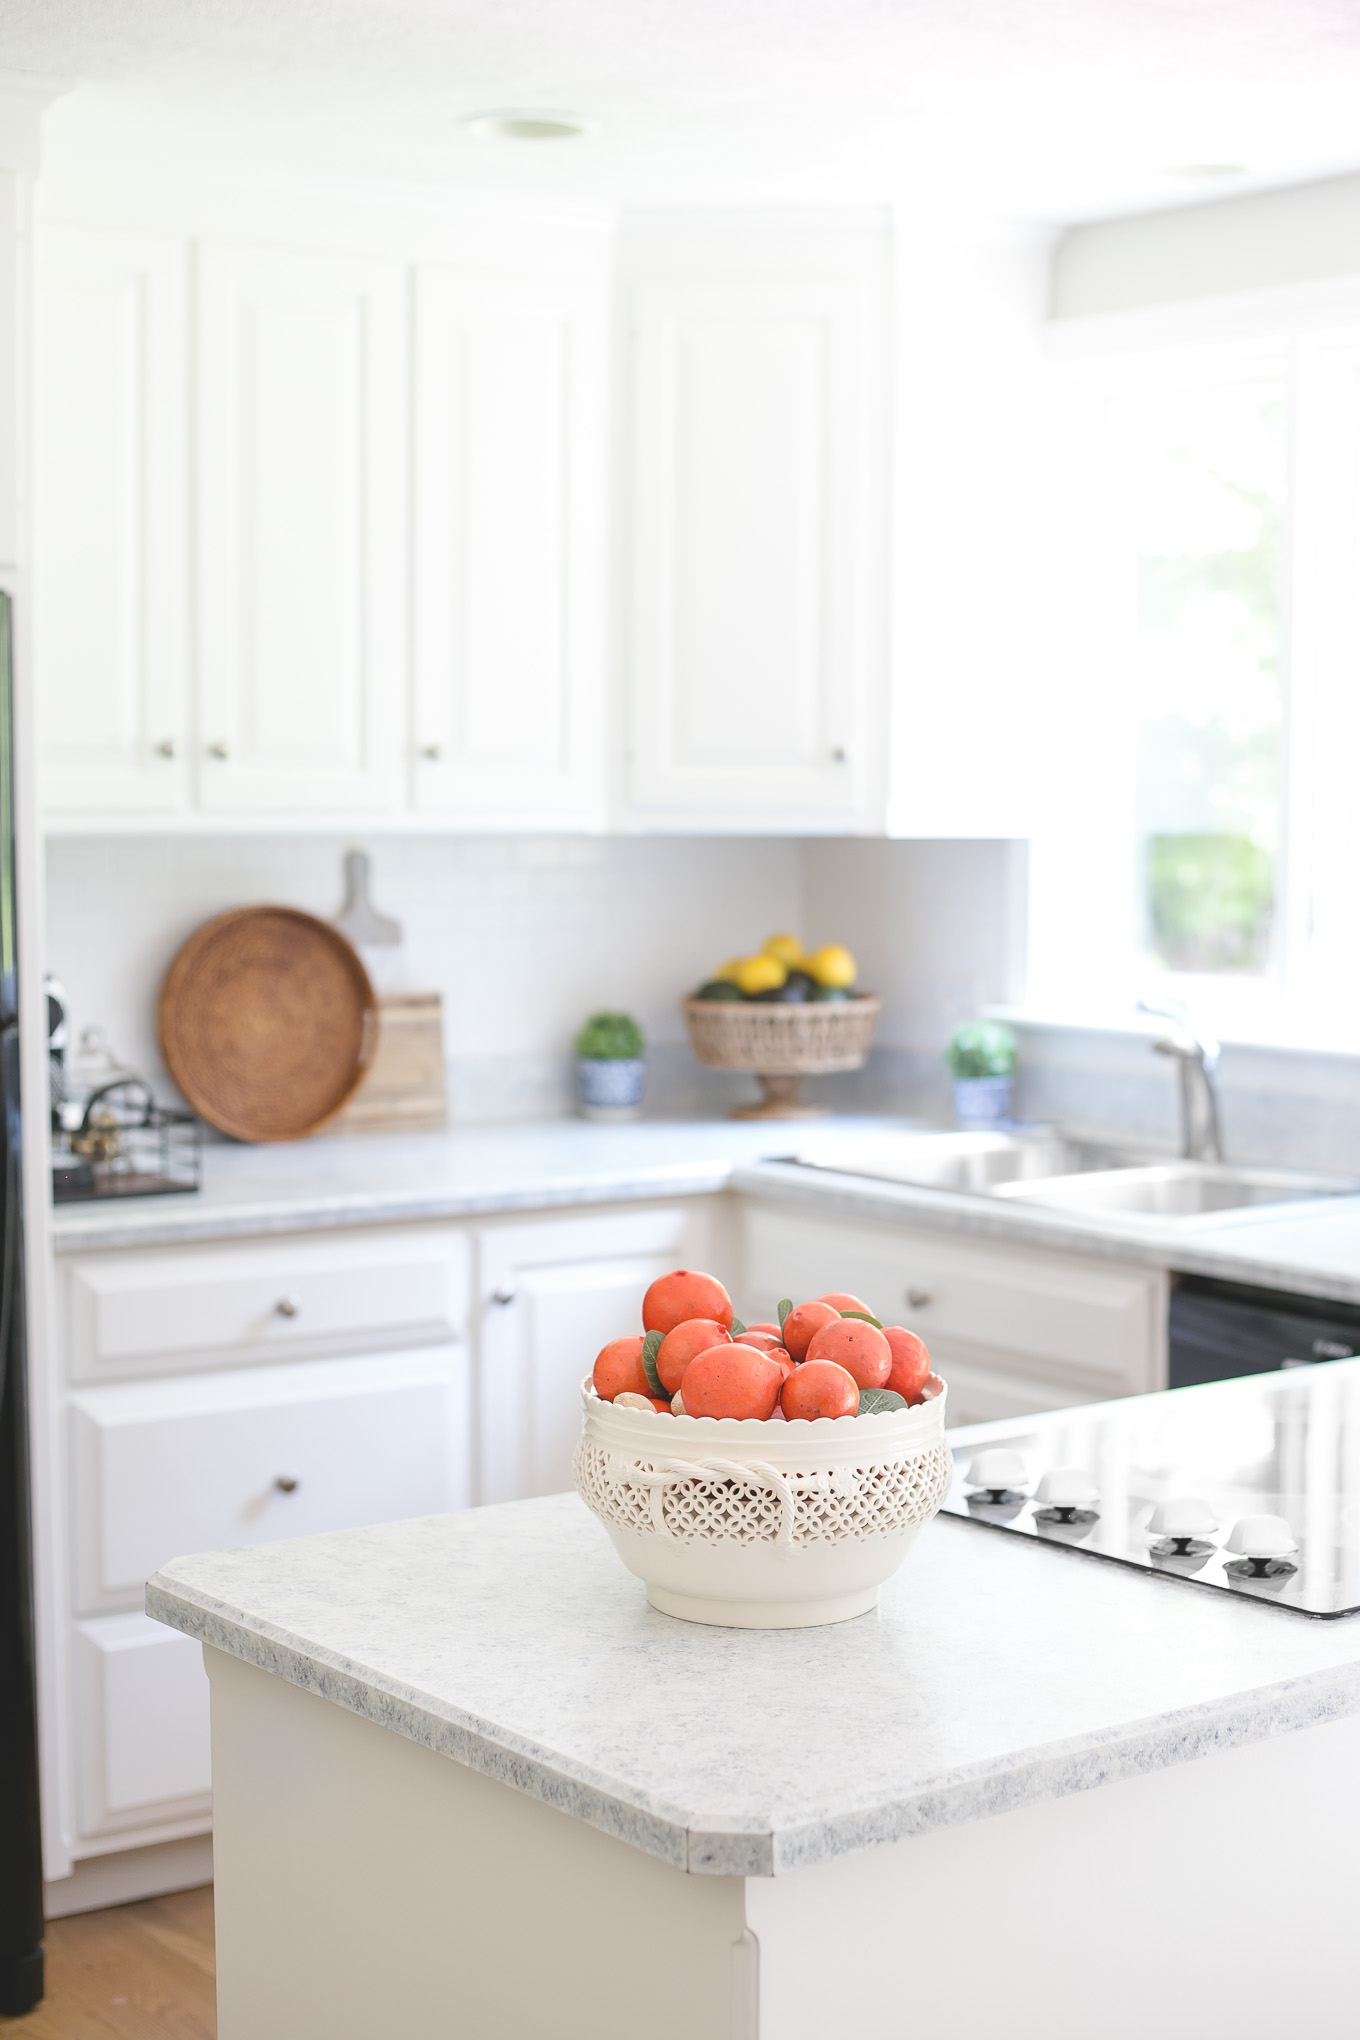 How I Painted My Kitchen Countertops, How To Paint Your Laminate Countertops Look Like Granite